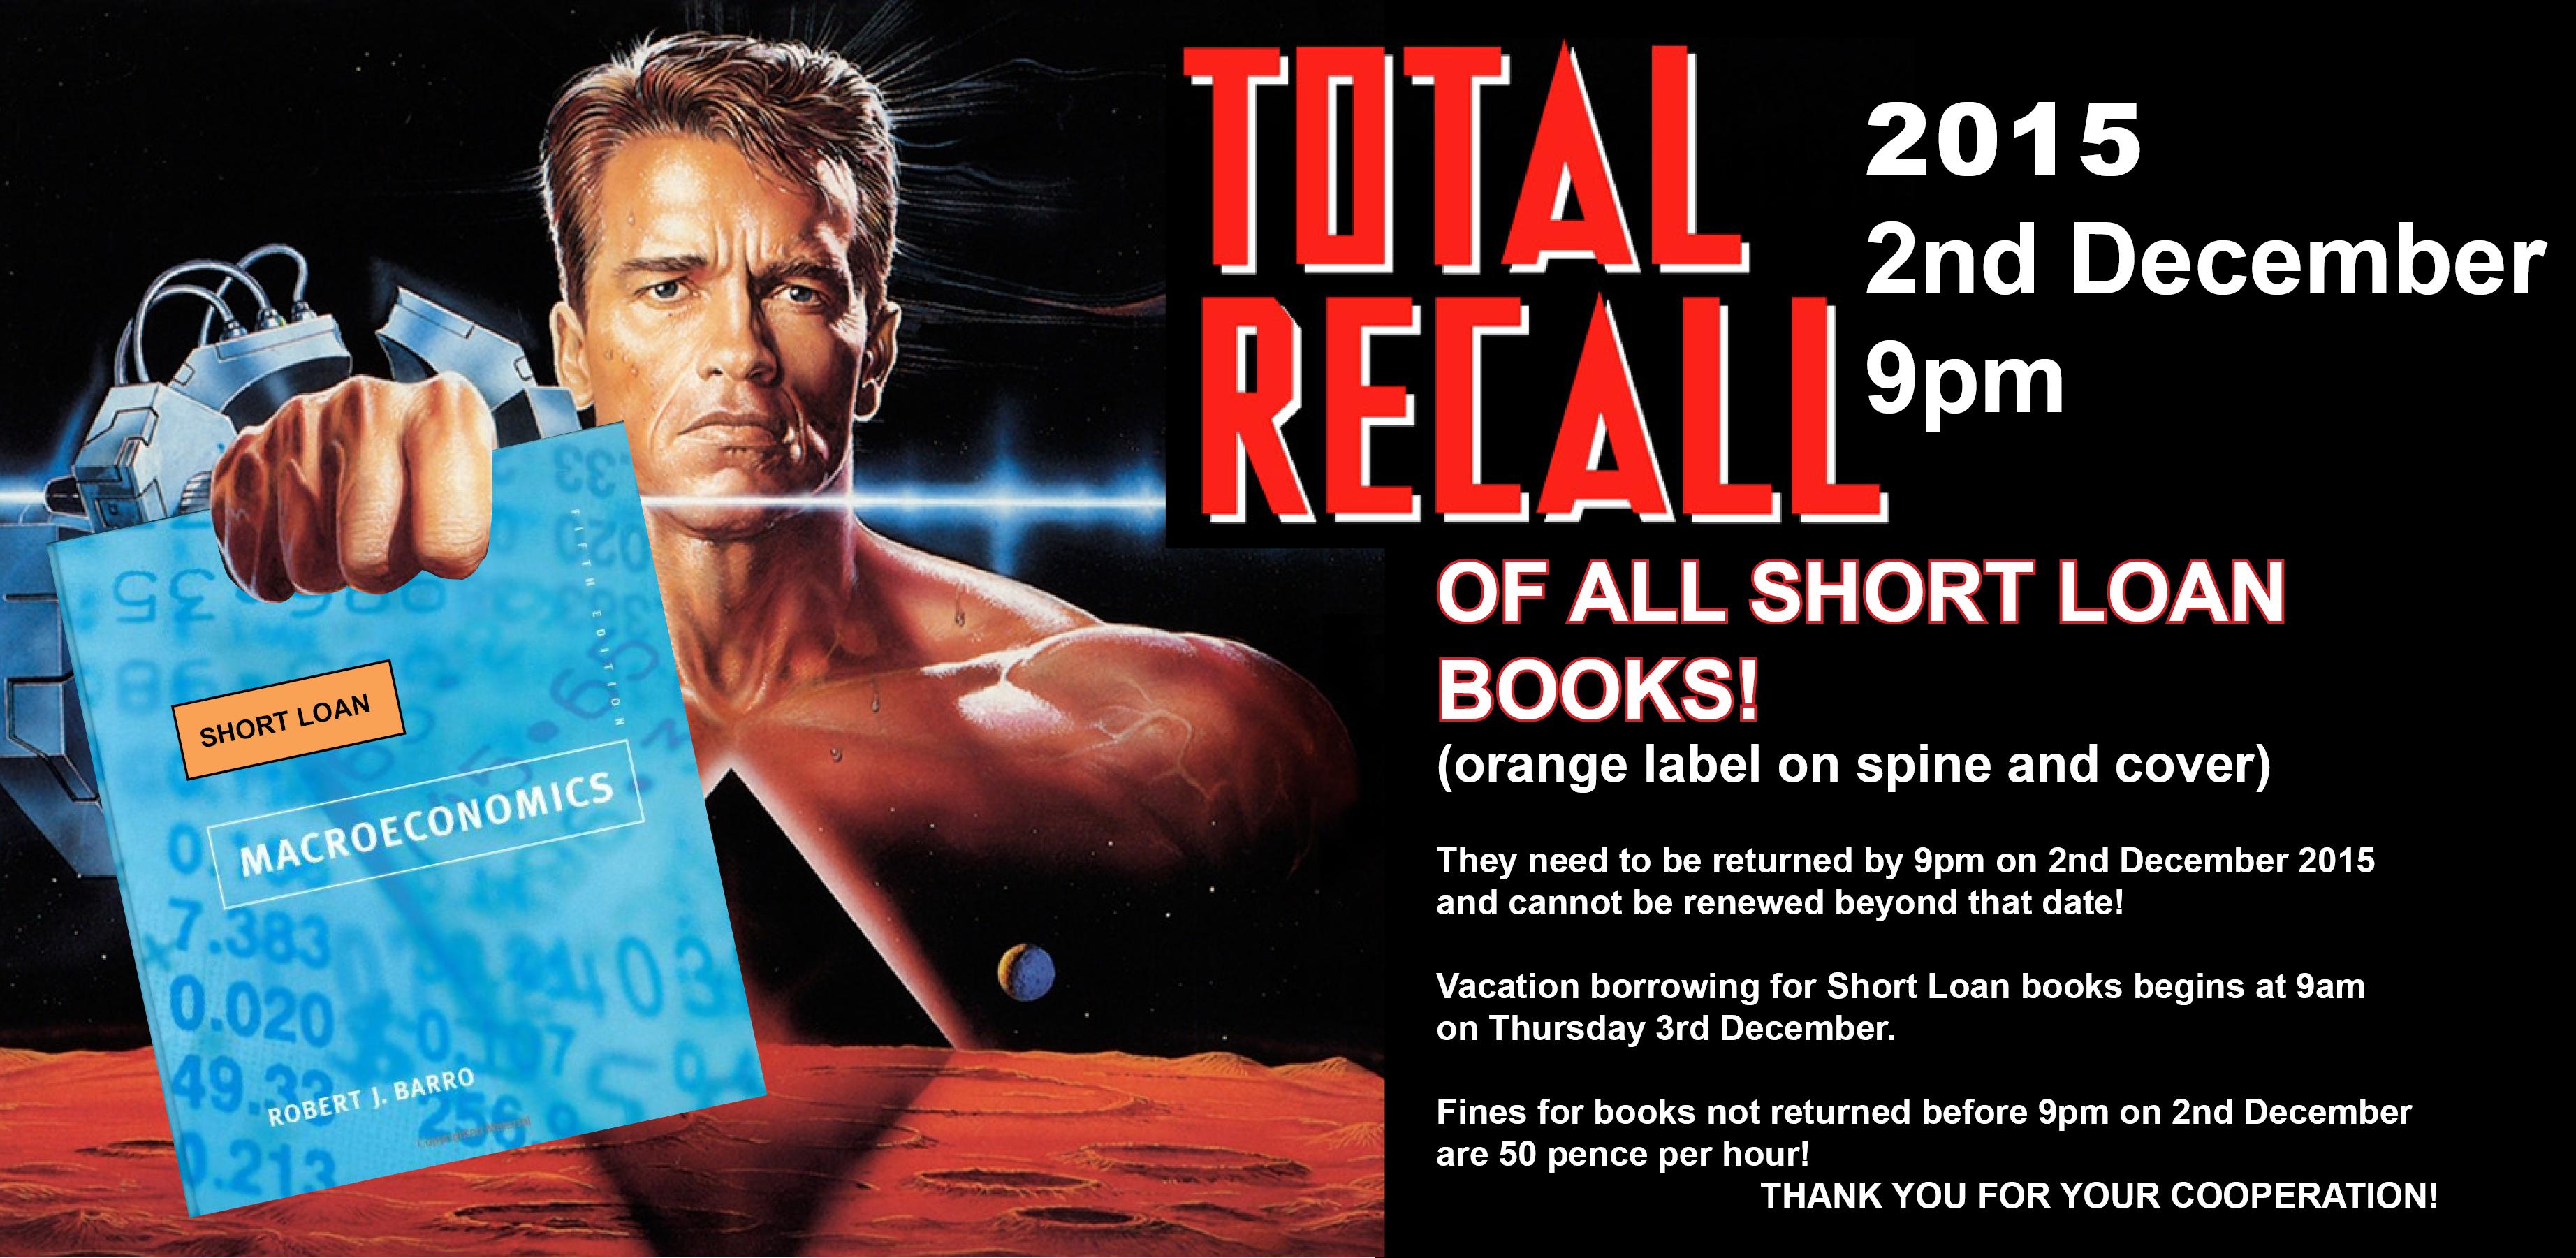 Total Recall - of all "Short Loan"/textbooks: before 9 pm  on 2 Dec 2015